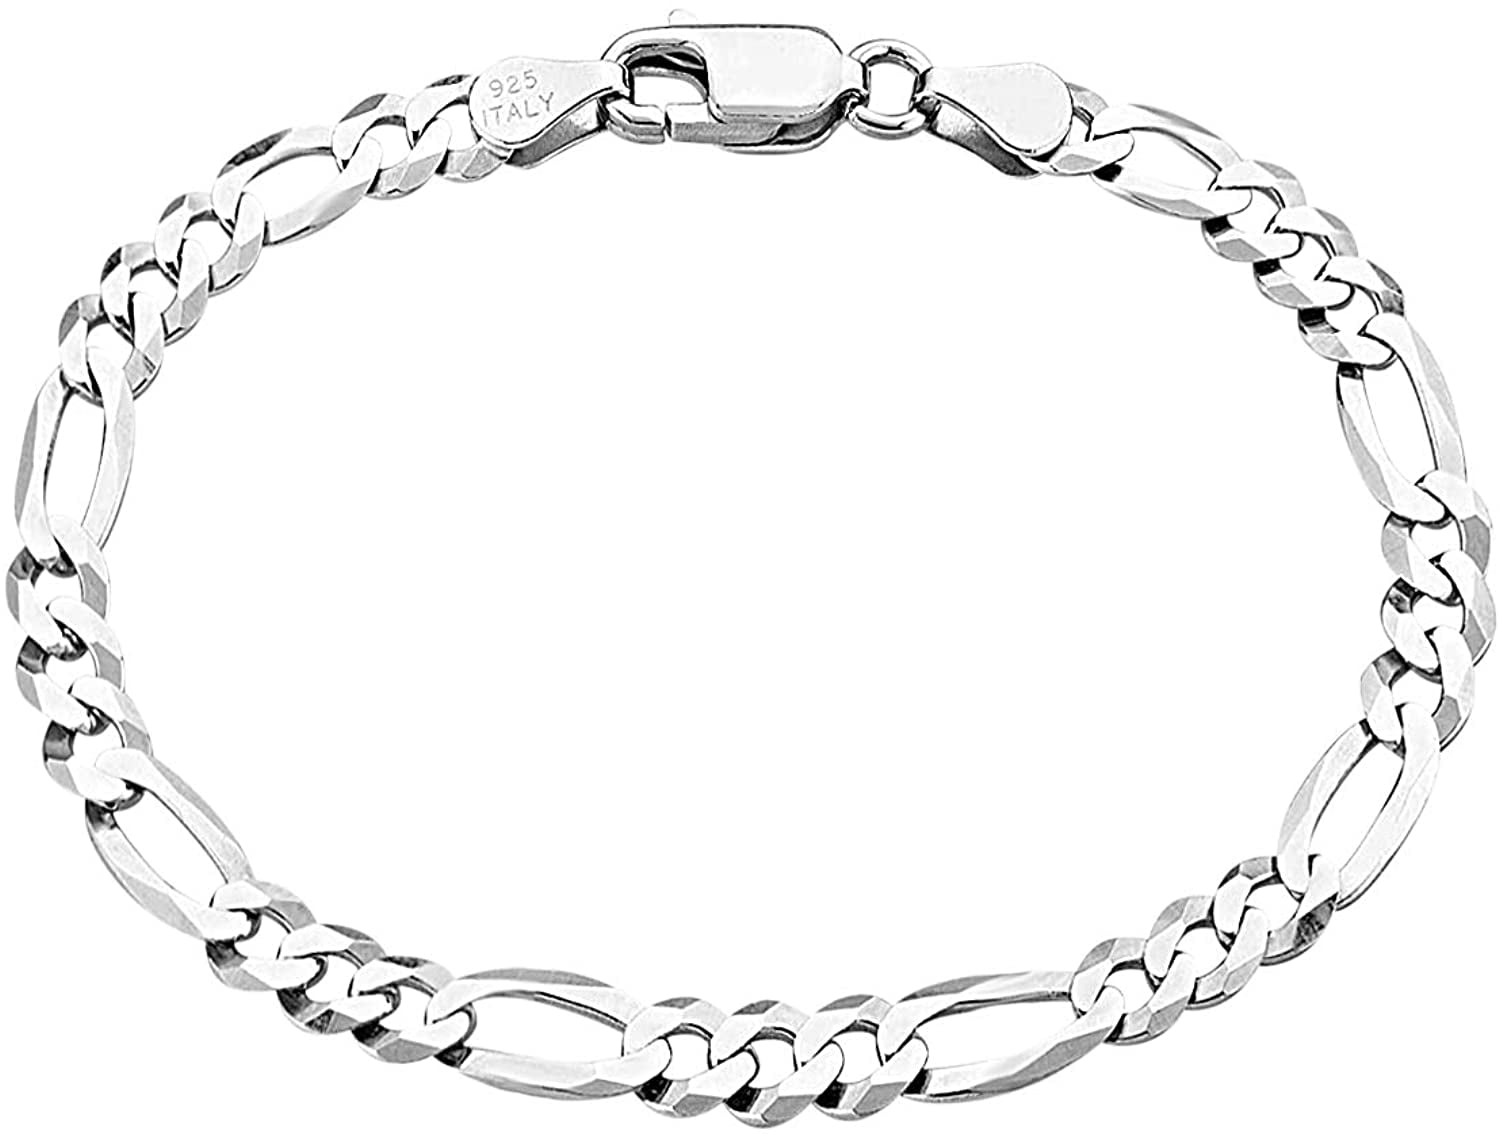 Savlano 925 Sterling Silver 7.5mm Italian Solid Figaro Link Chain Necklace with Gift Box for Men & Women Made in Italy 